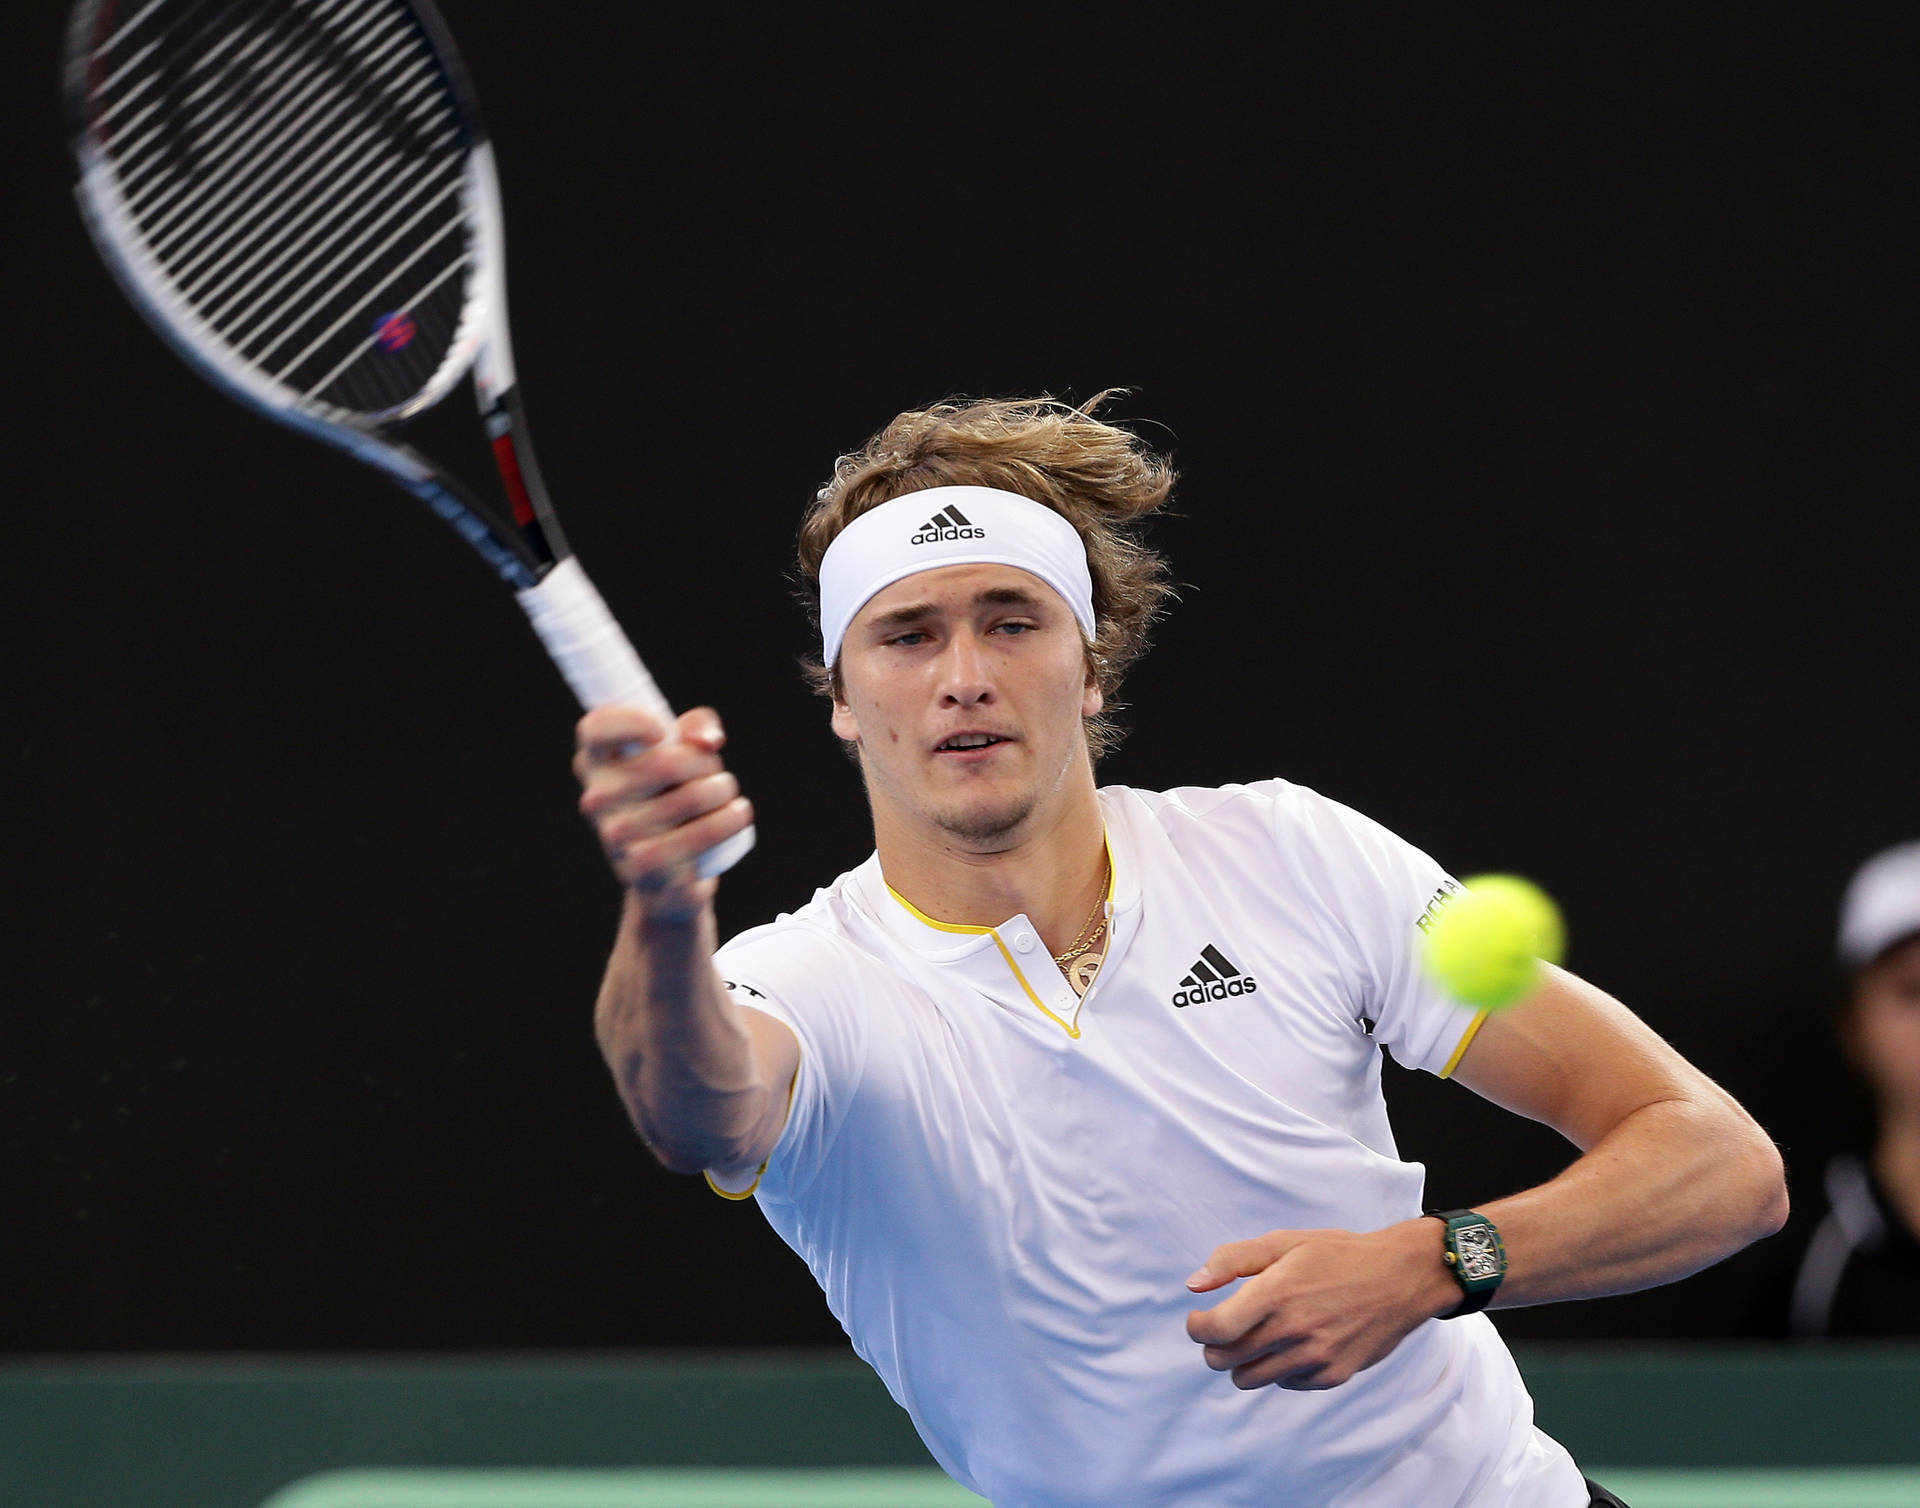 Alexander Zverev Delivers A Forehand Volley On Court